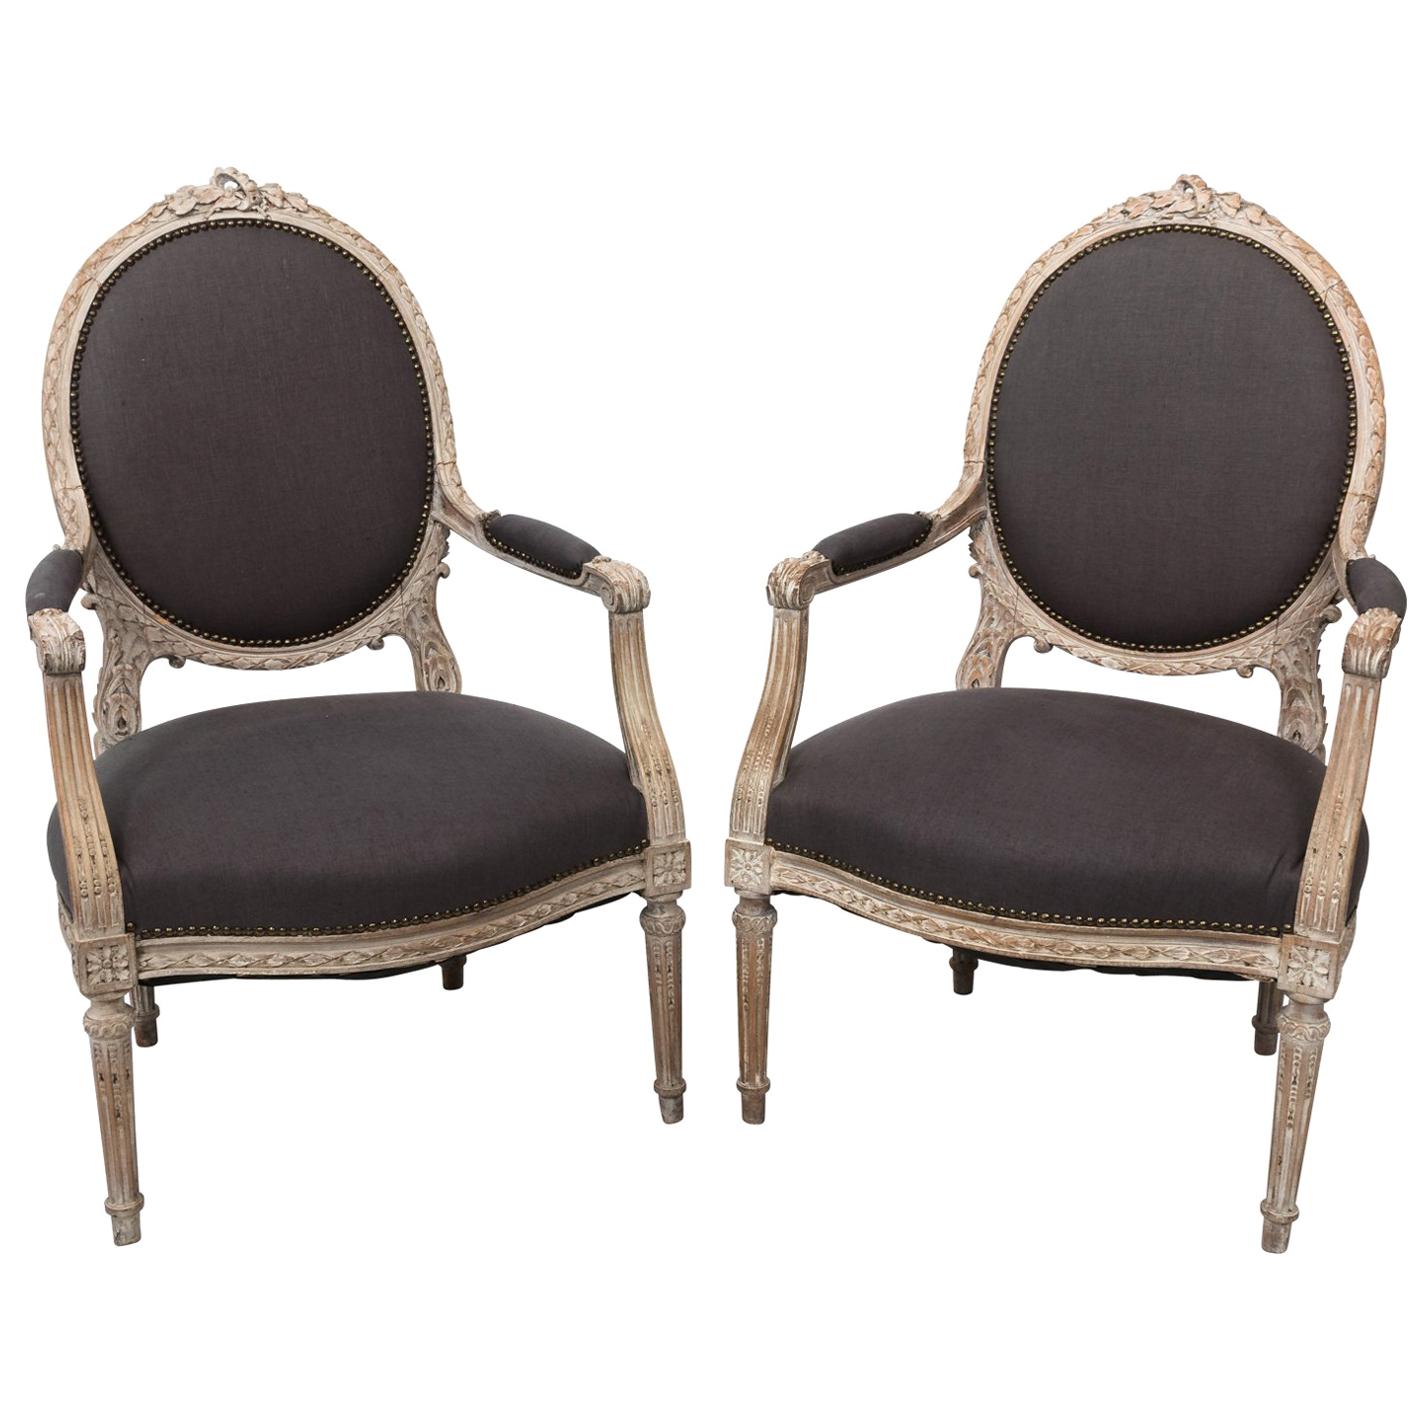 Pair of Grey Upholstered Louis XVI Style Armchairs, circa 1820